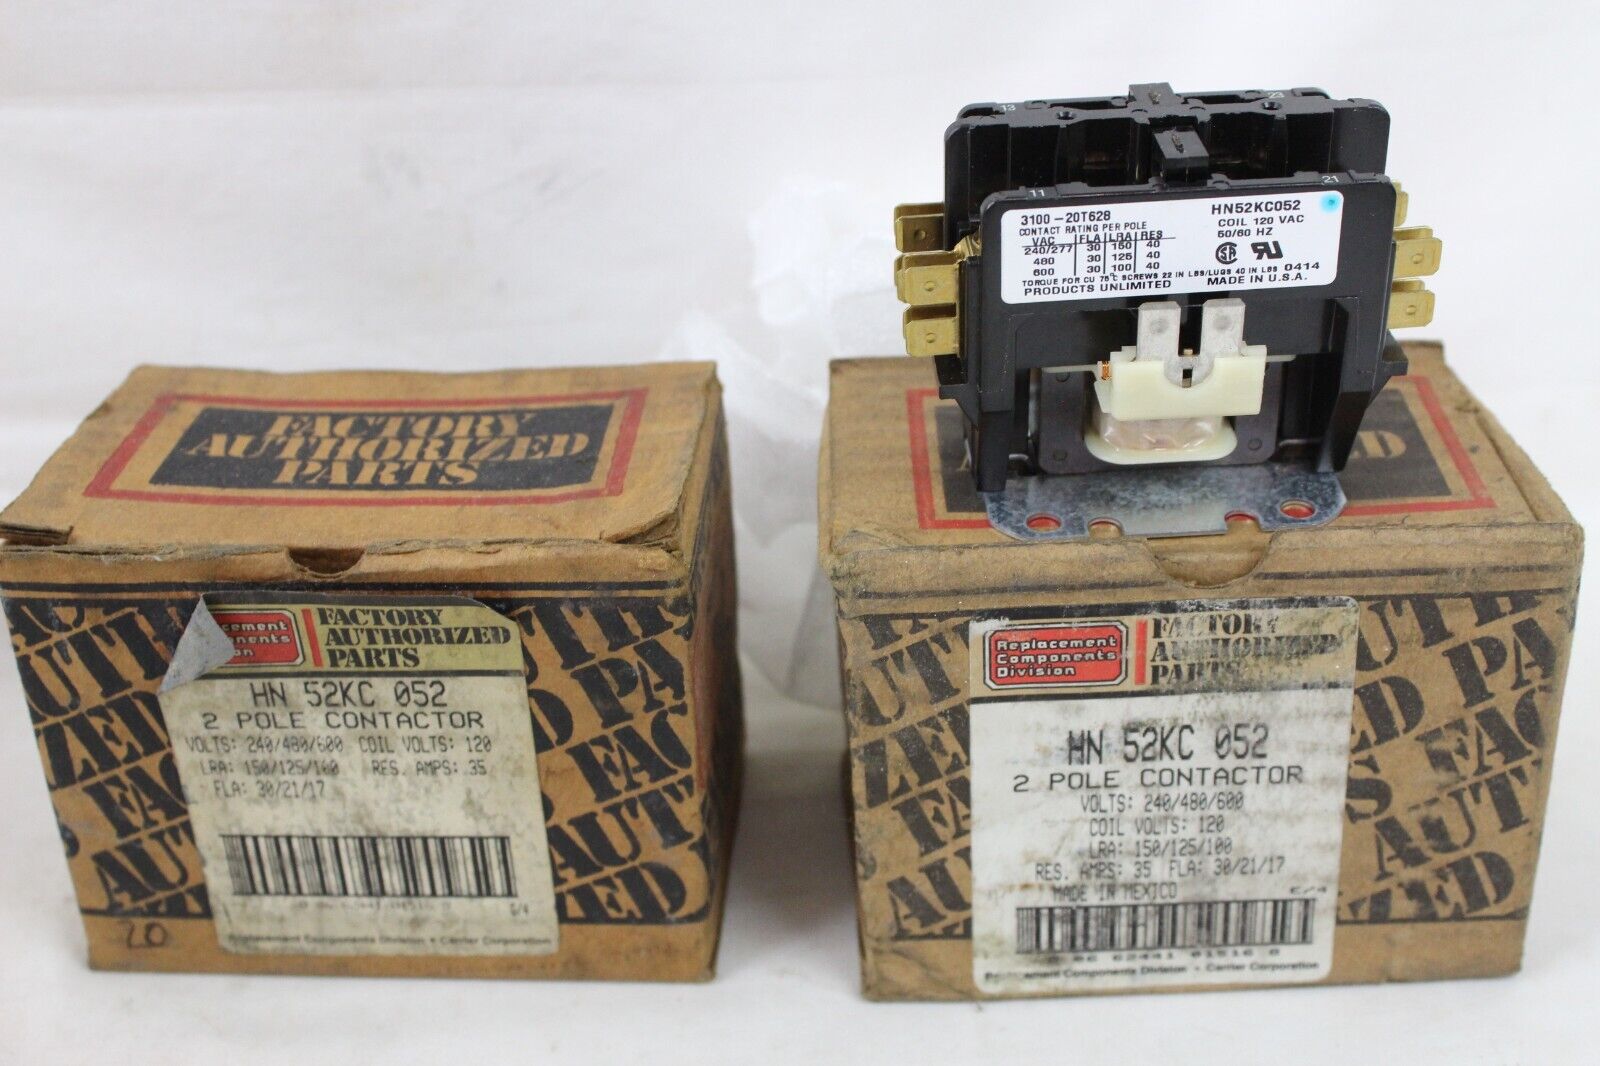 2 New Factory Authorized Part Hn 52kc 052 Contactor 2 Pole 240v 35 Amp Coil 120v